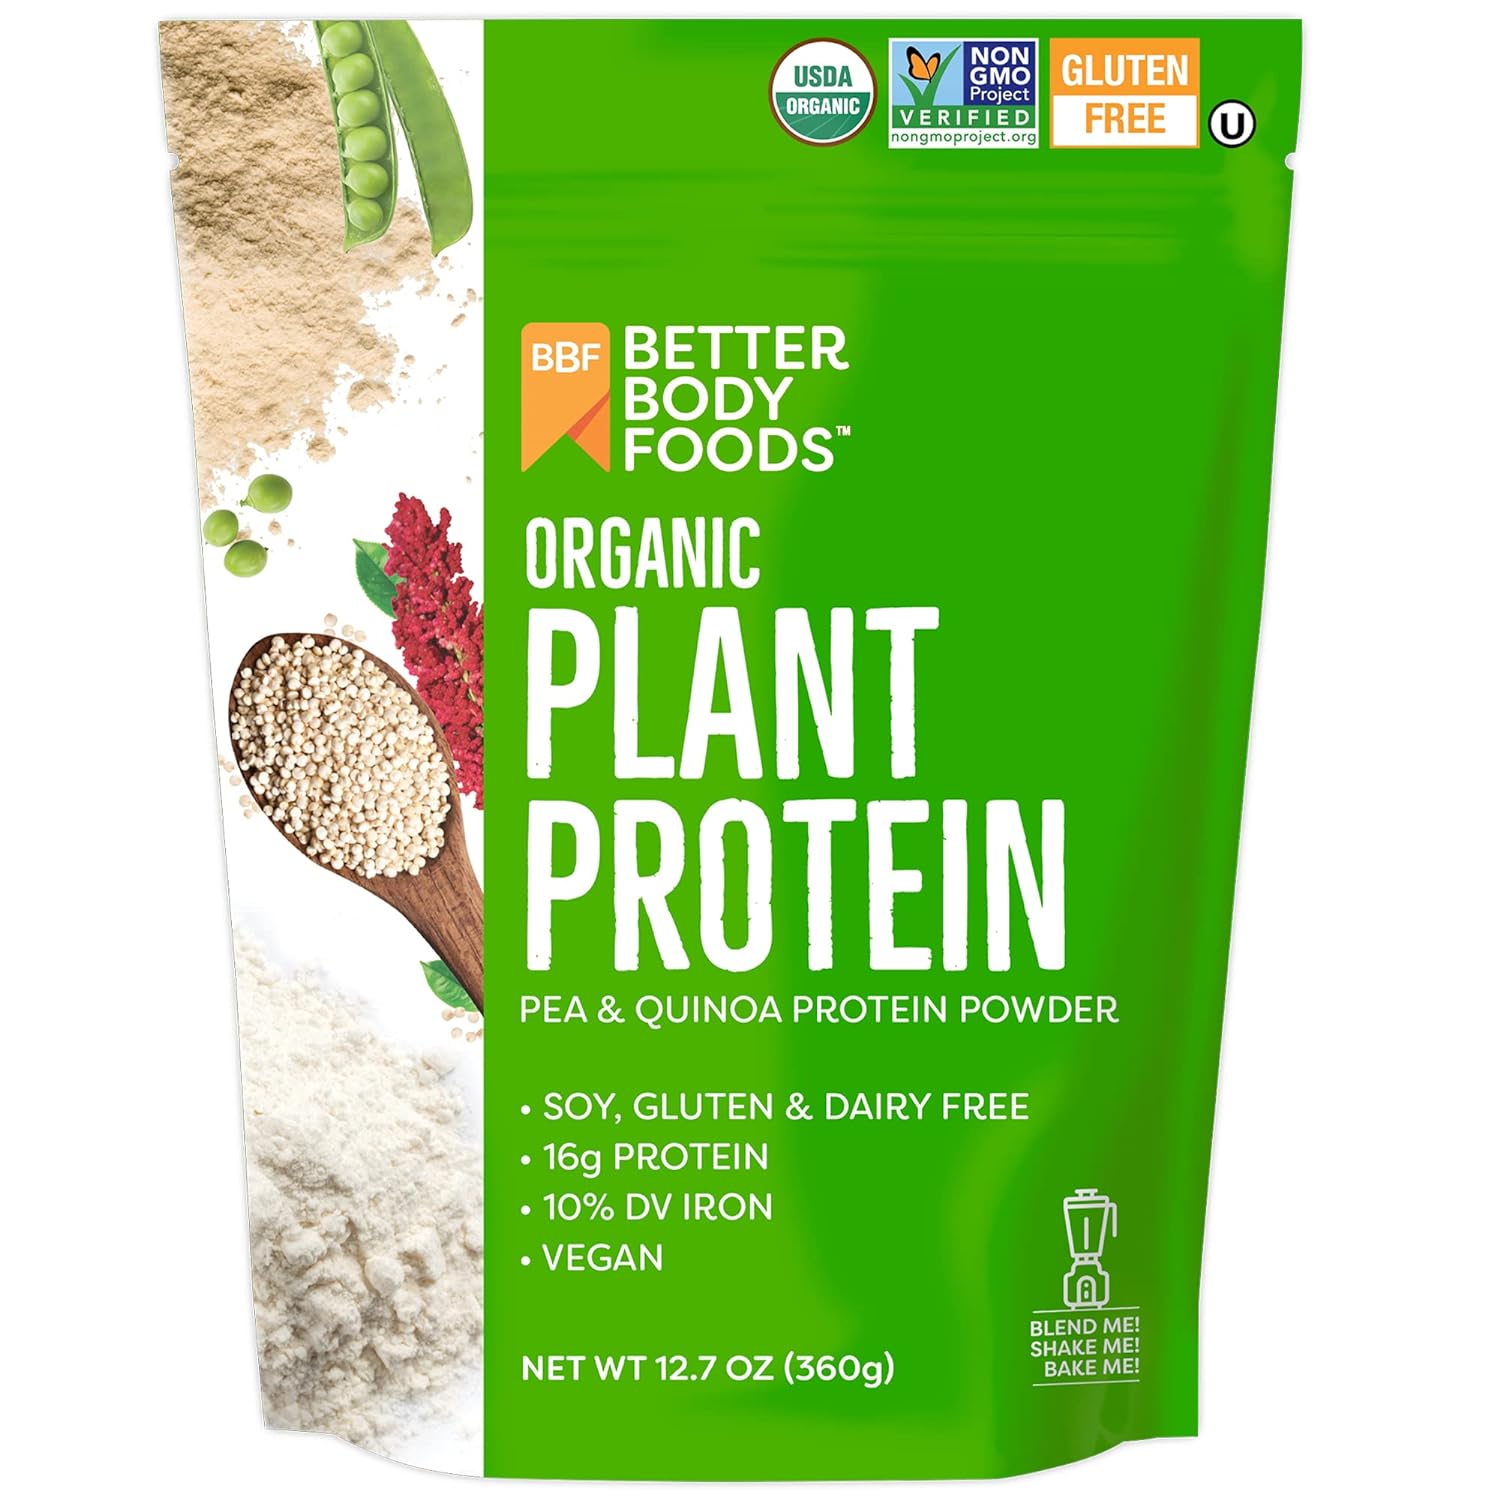 BetterBody Foods Organic Plant Based Protein Powder, - 16g of Protein,